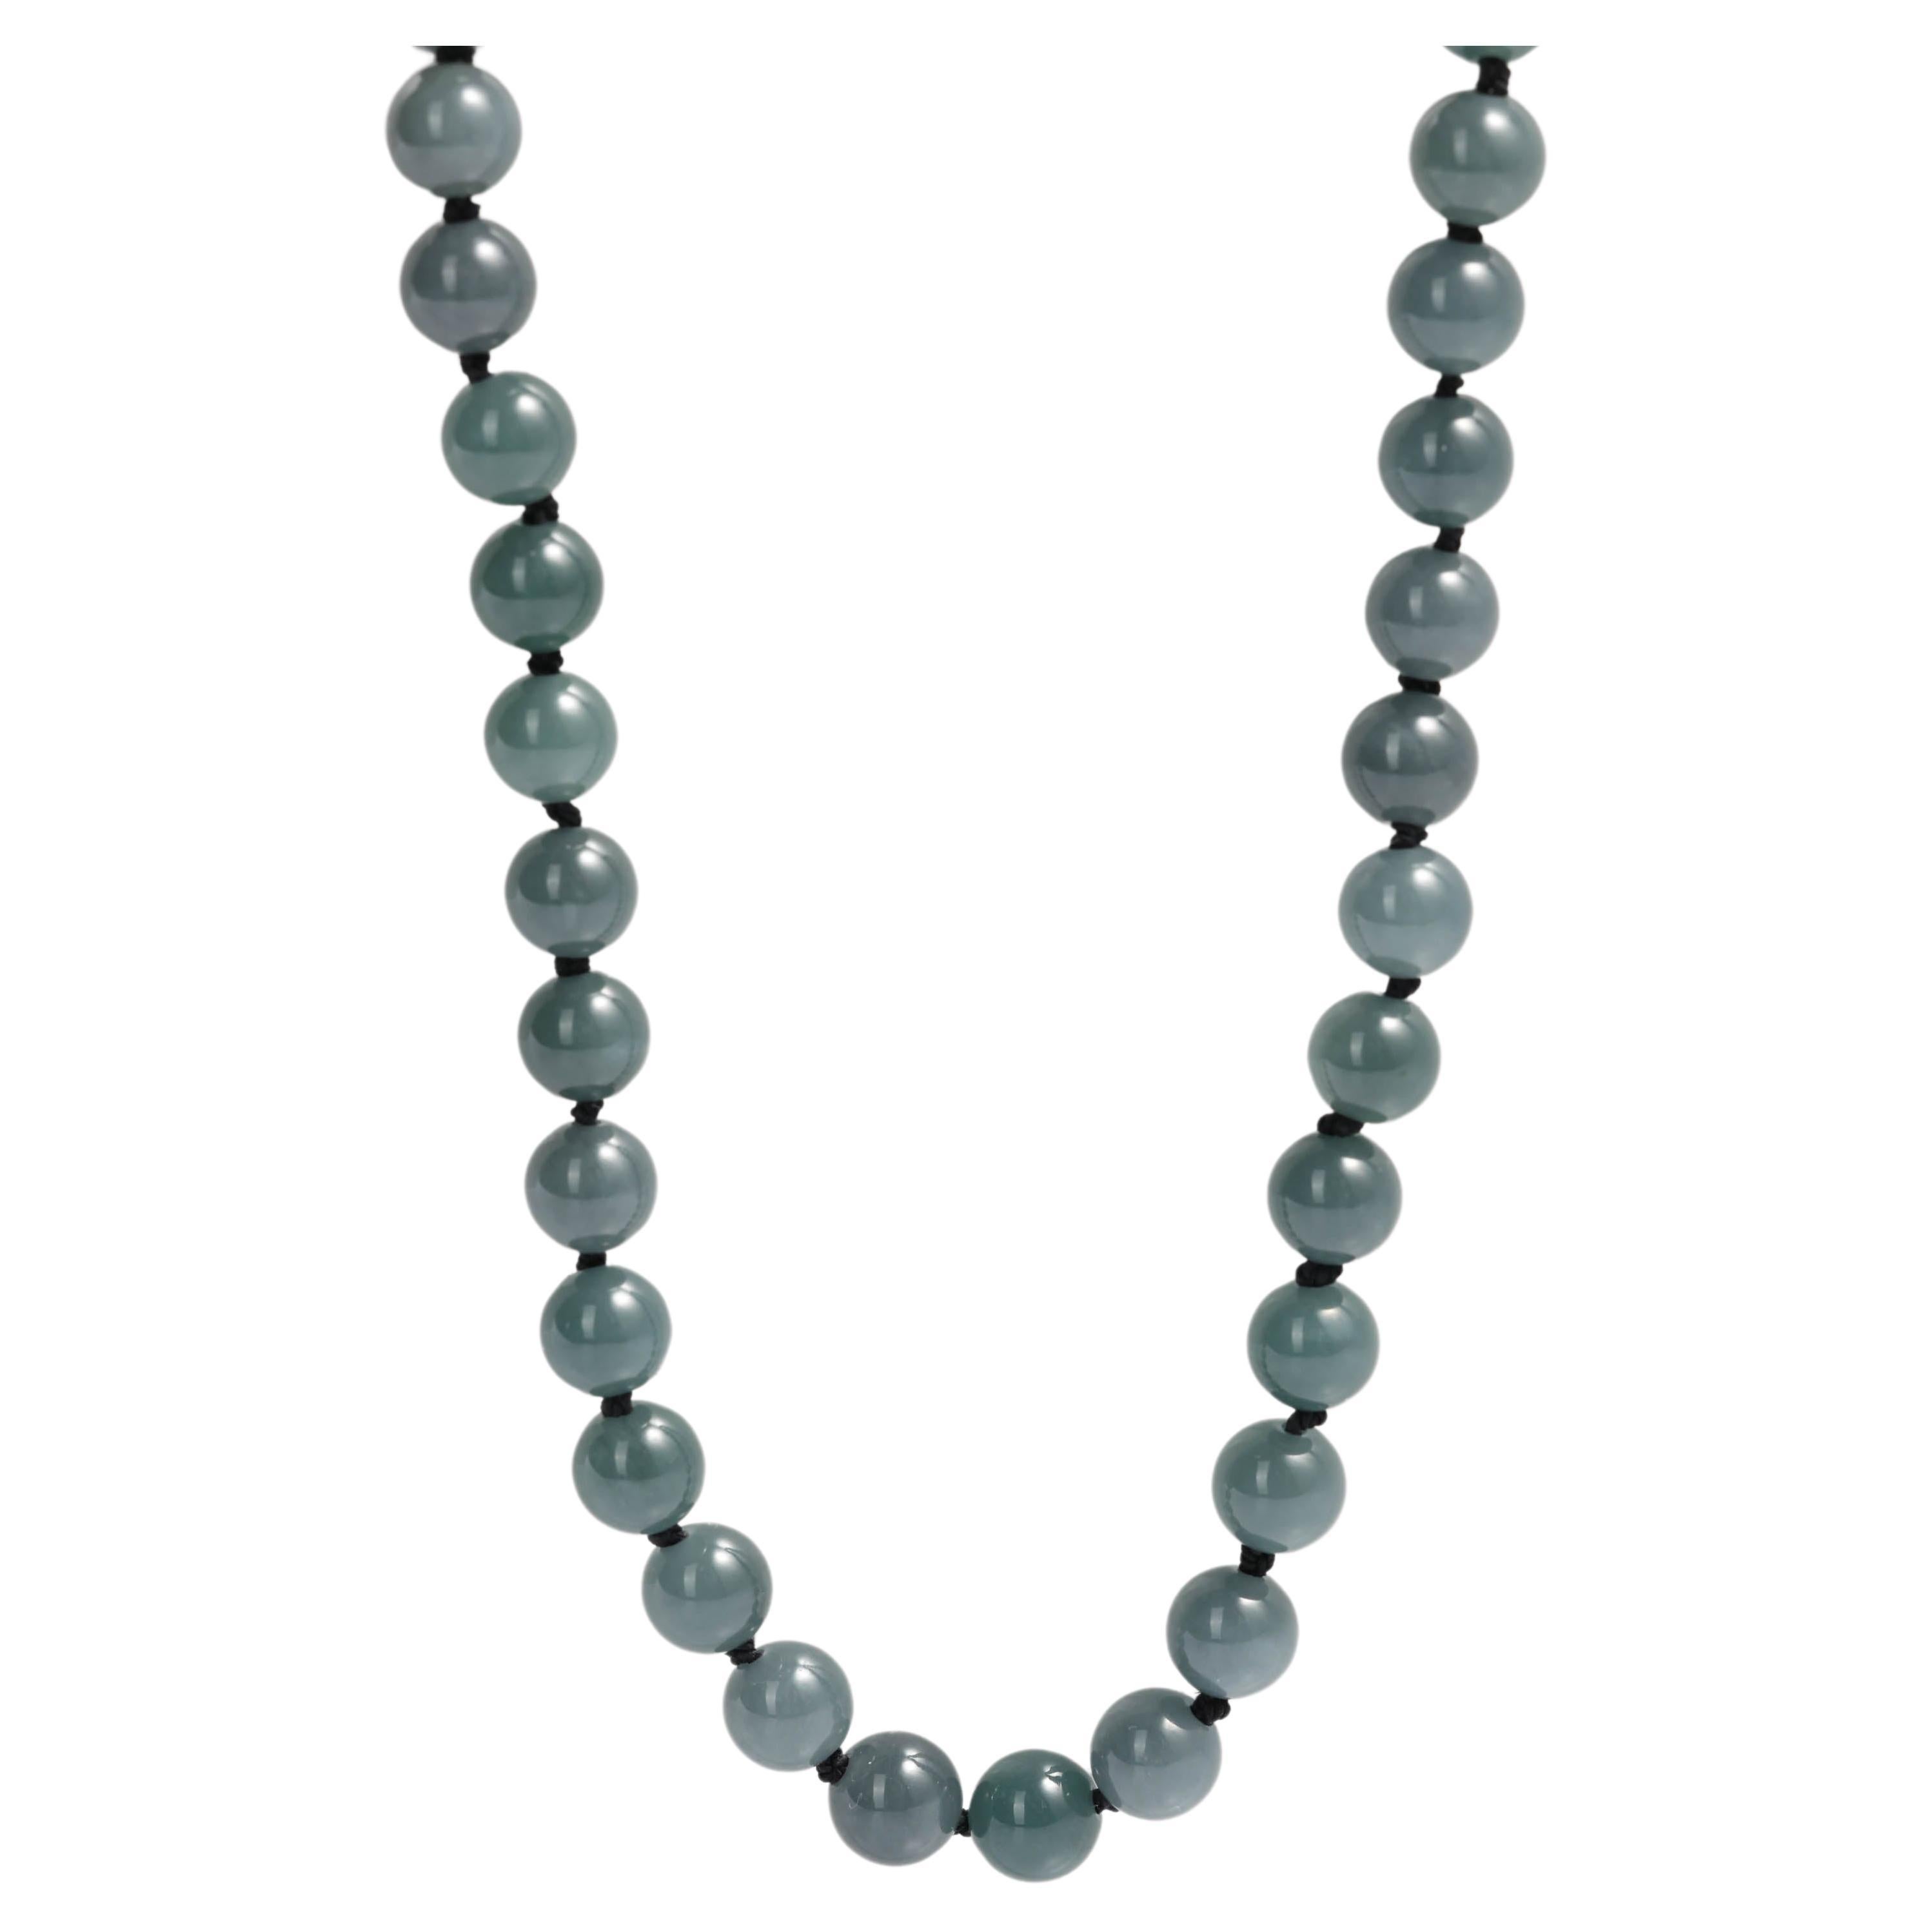 Jade Necklace Translucent Greenish-Blue Certified Untreated, New, 25"